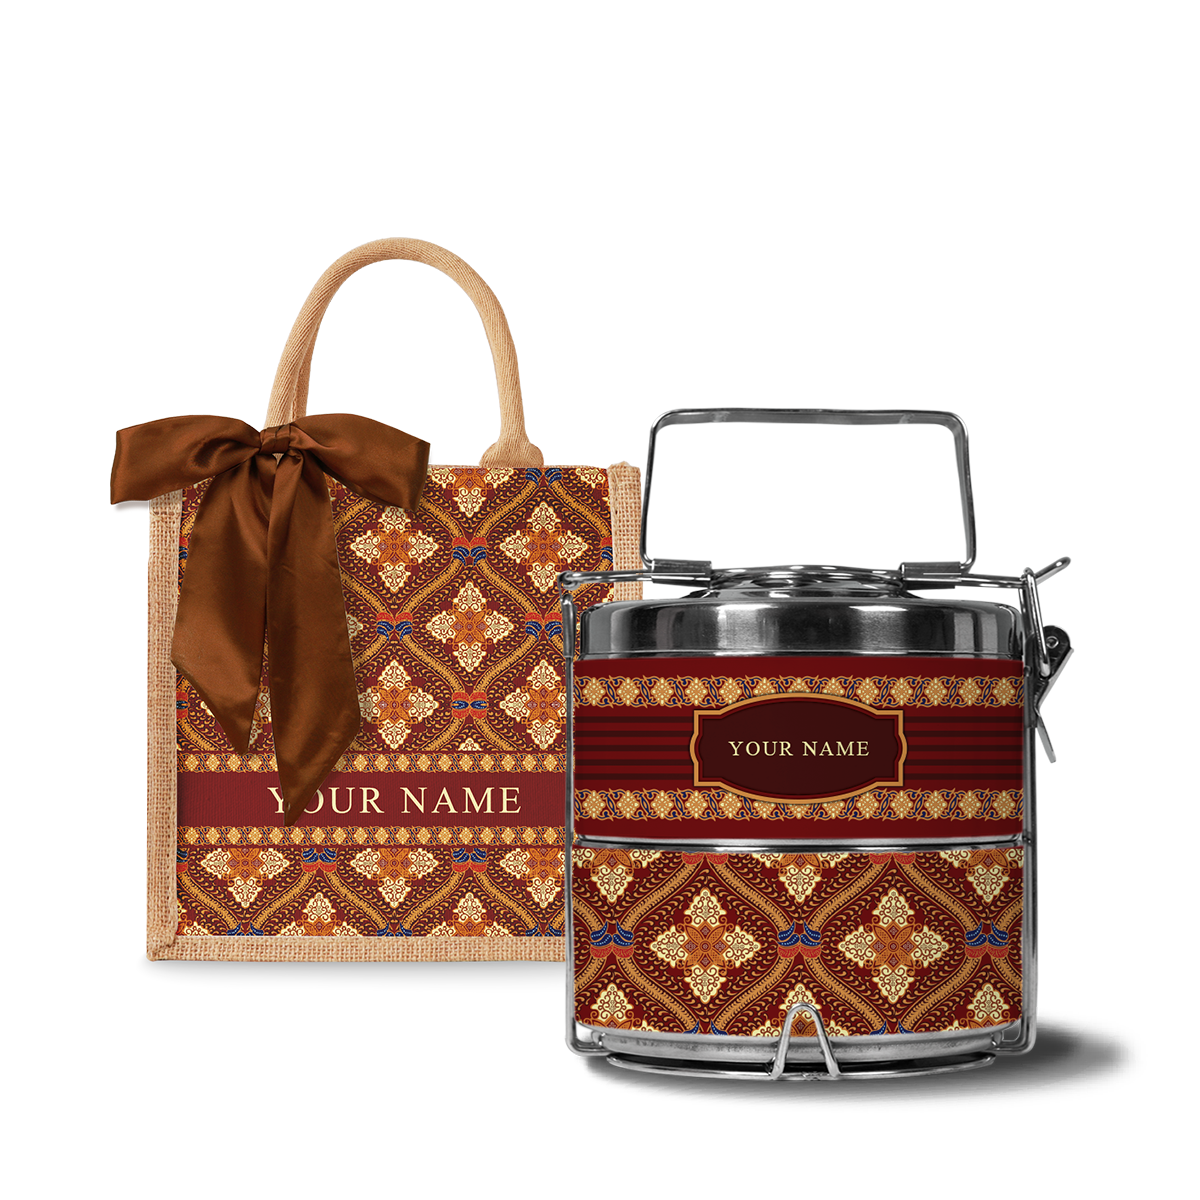 Kencono Series – Lunch Tote Bag with Two-Tier Tiffin Carrier